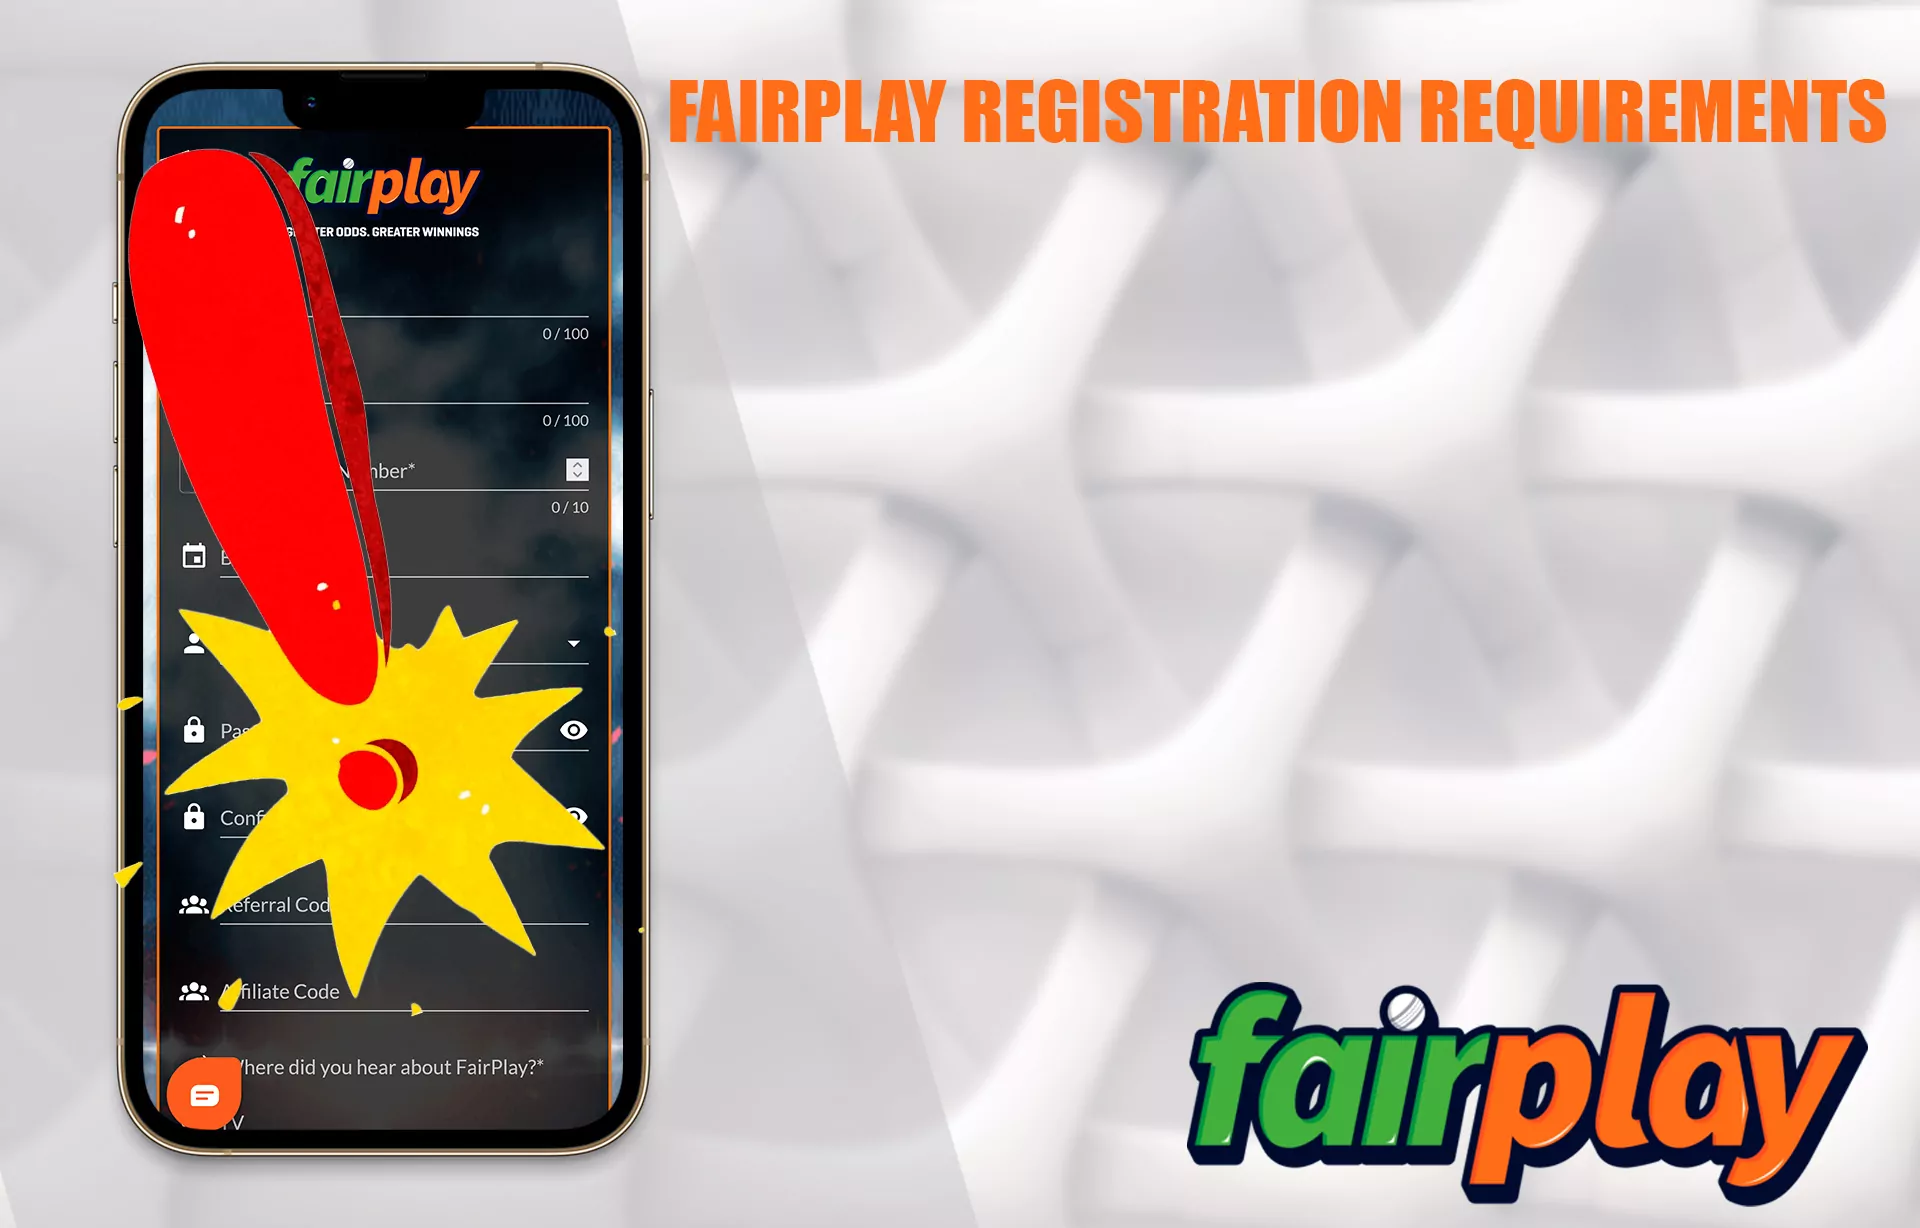 What are the important points you need to know when registering in Fairplay.